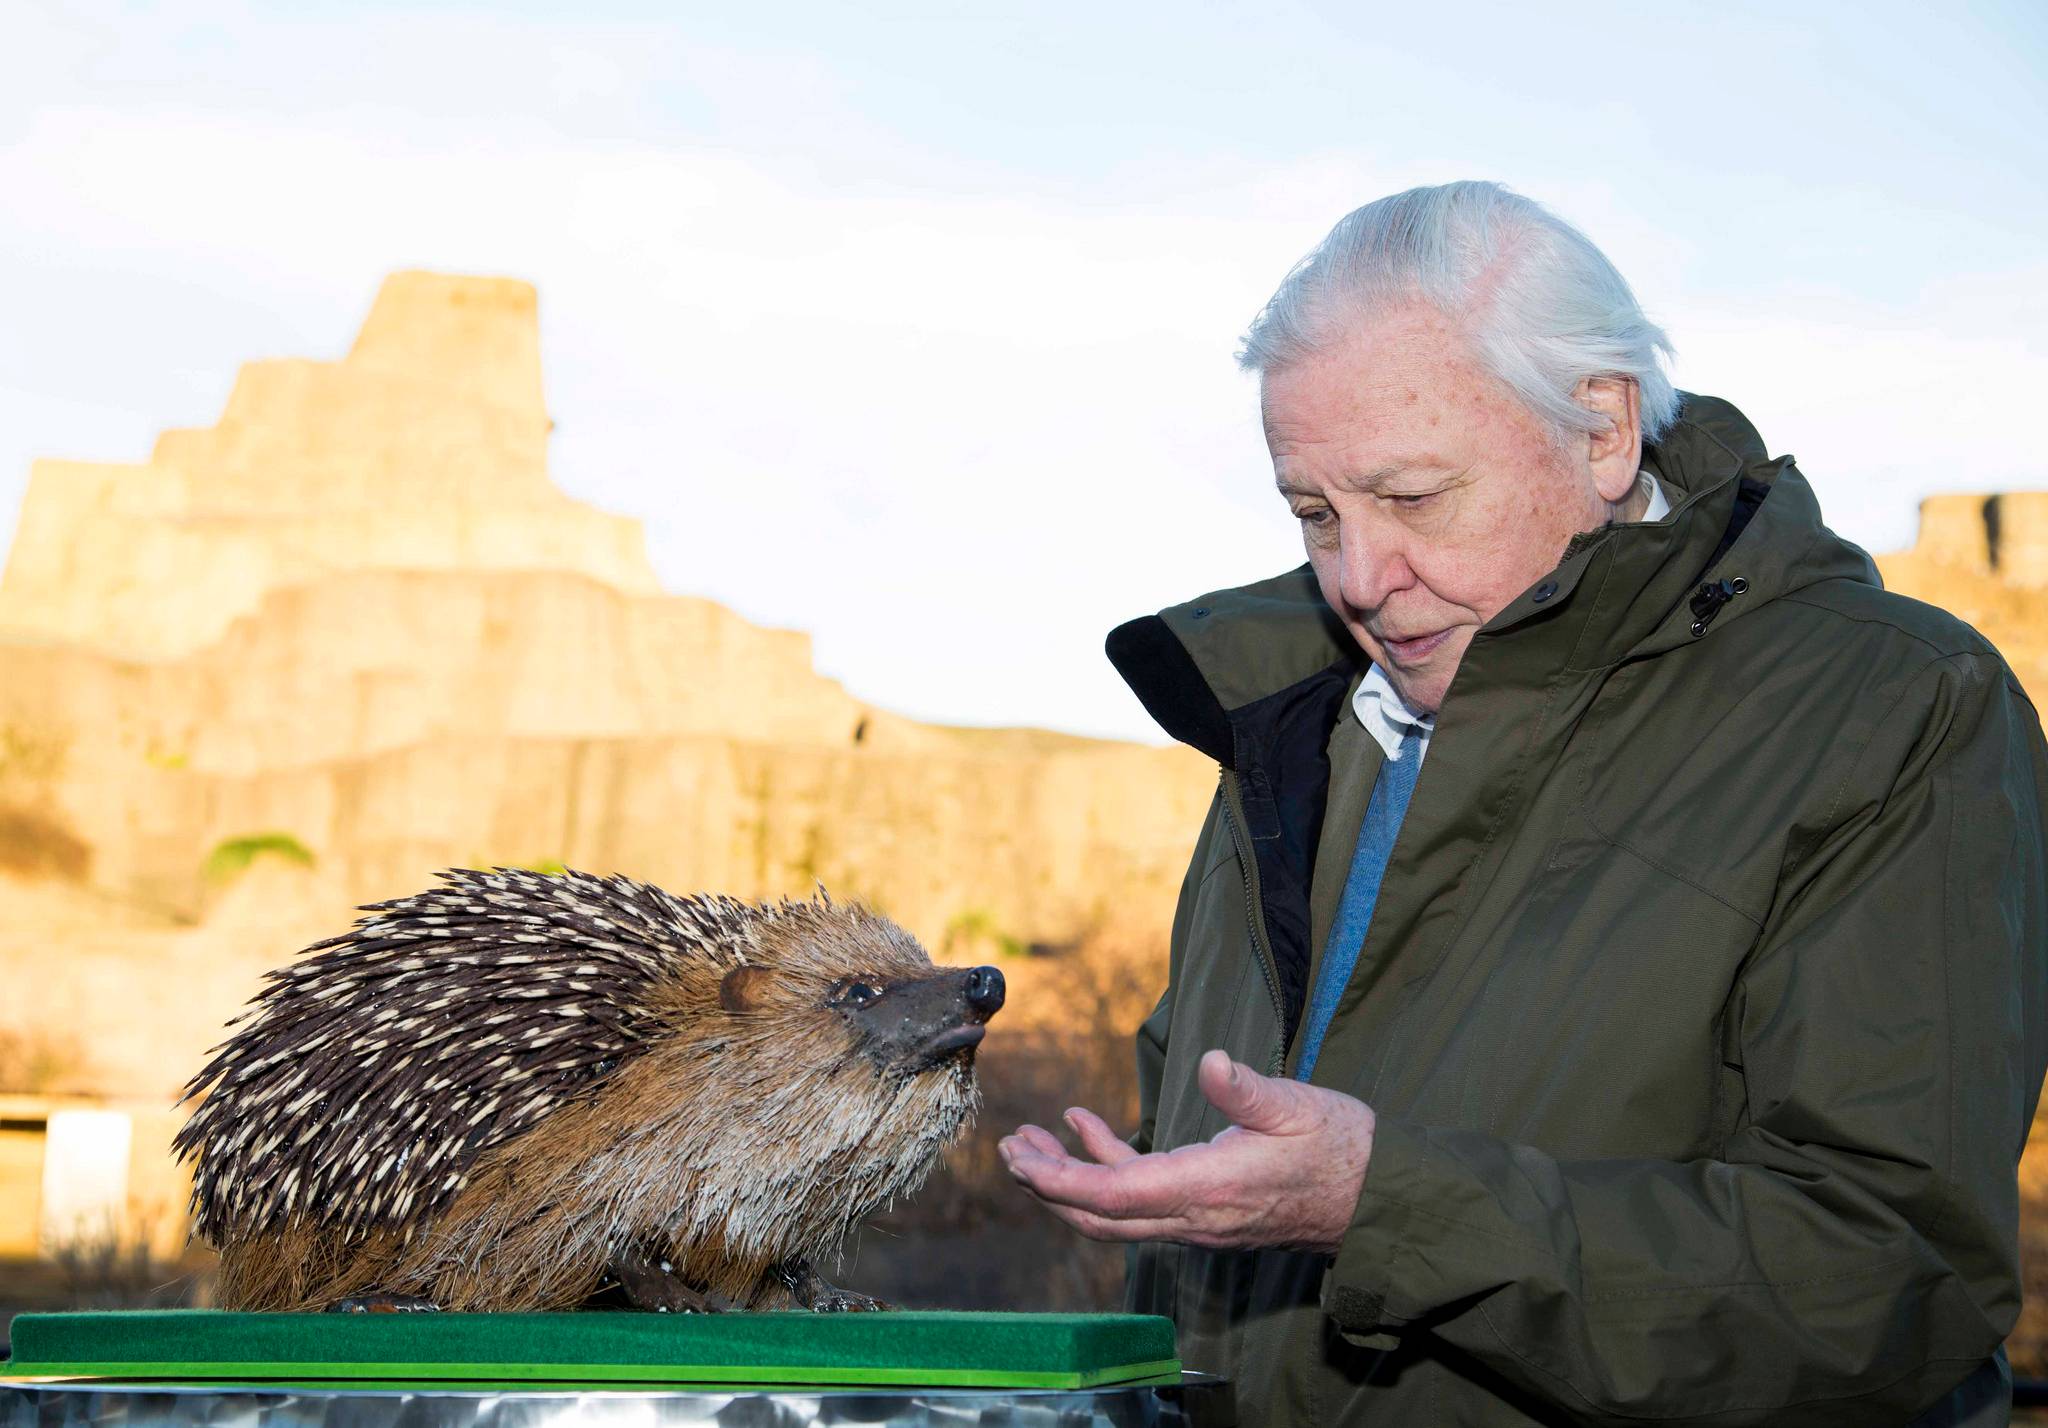 Young people are David Attenborough’s biggest fans